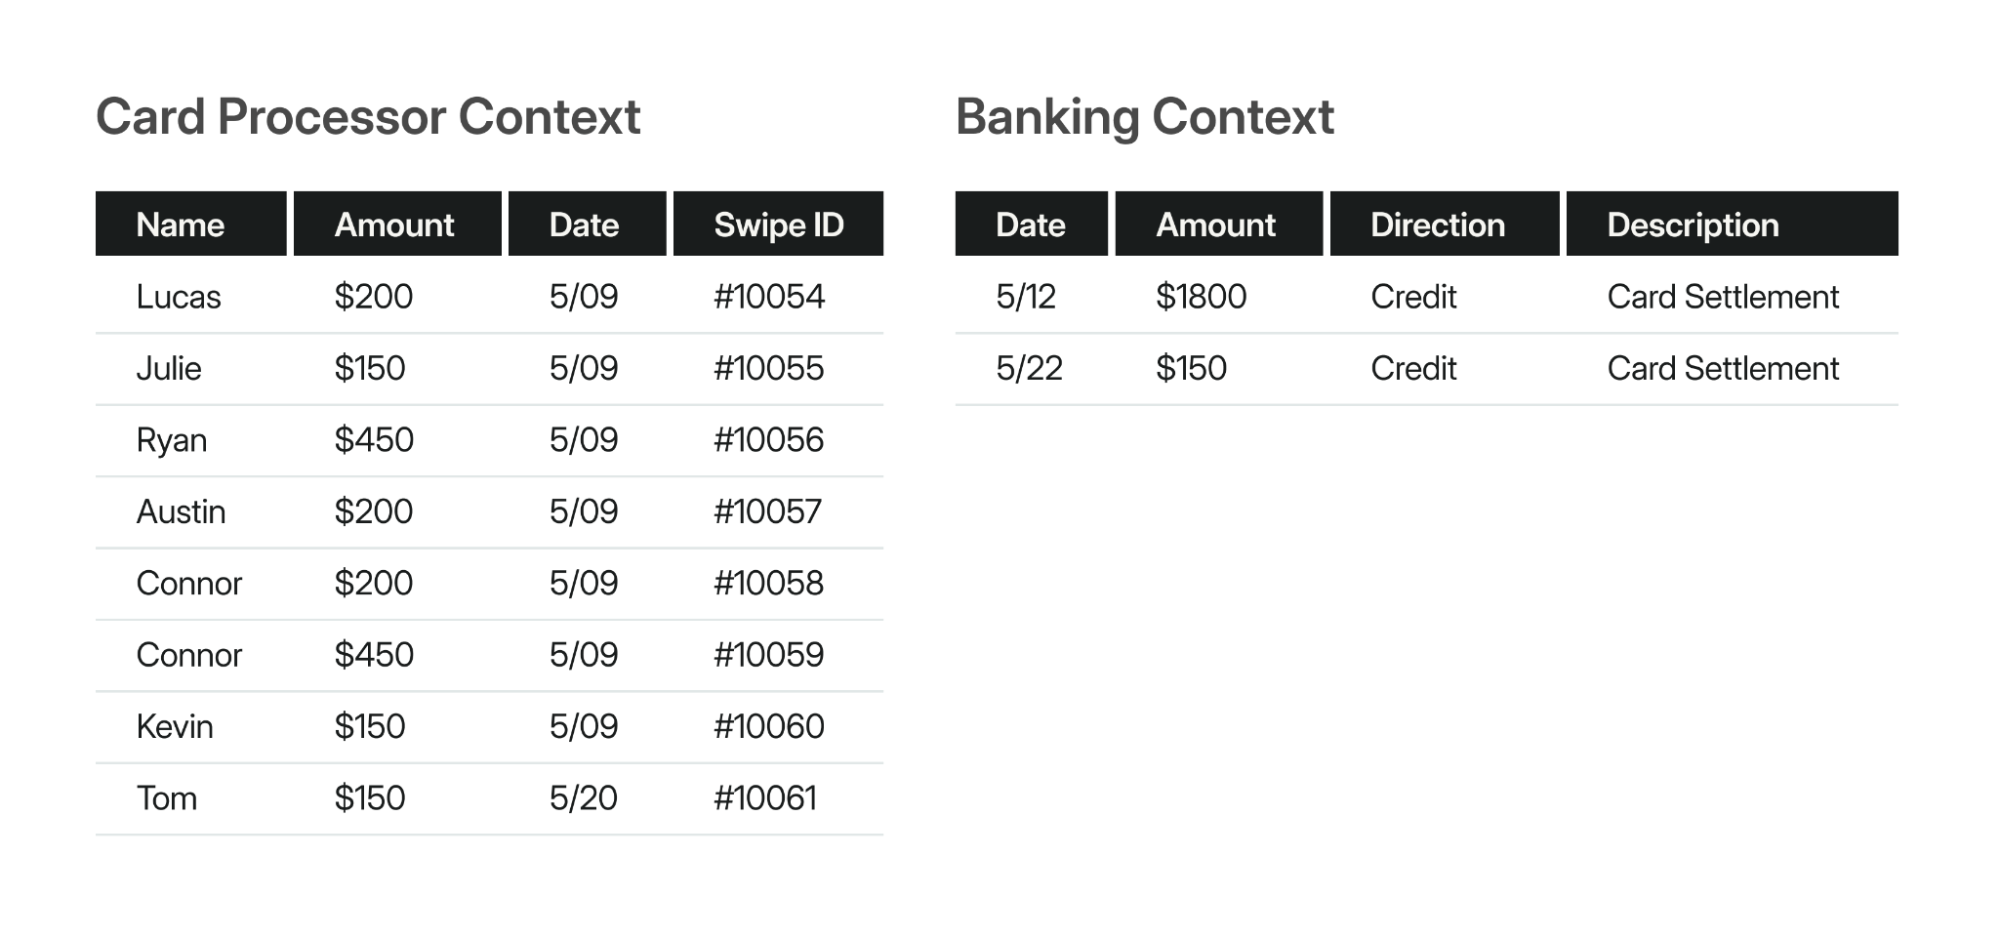 Table showing card processor context v. banking context